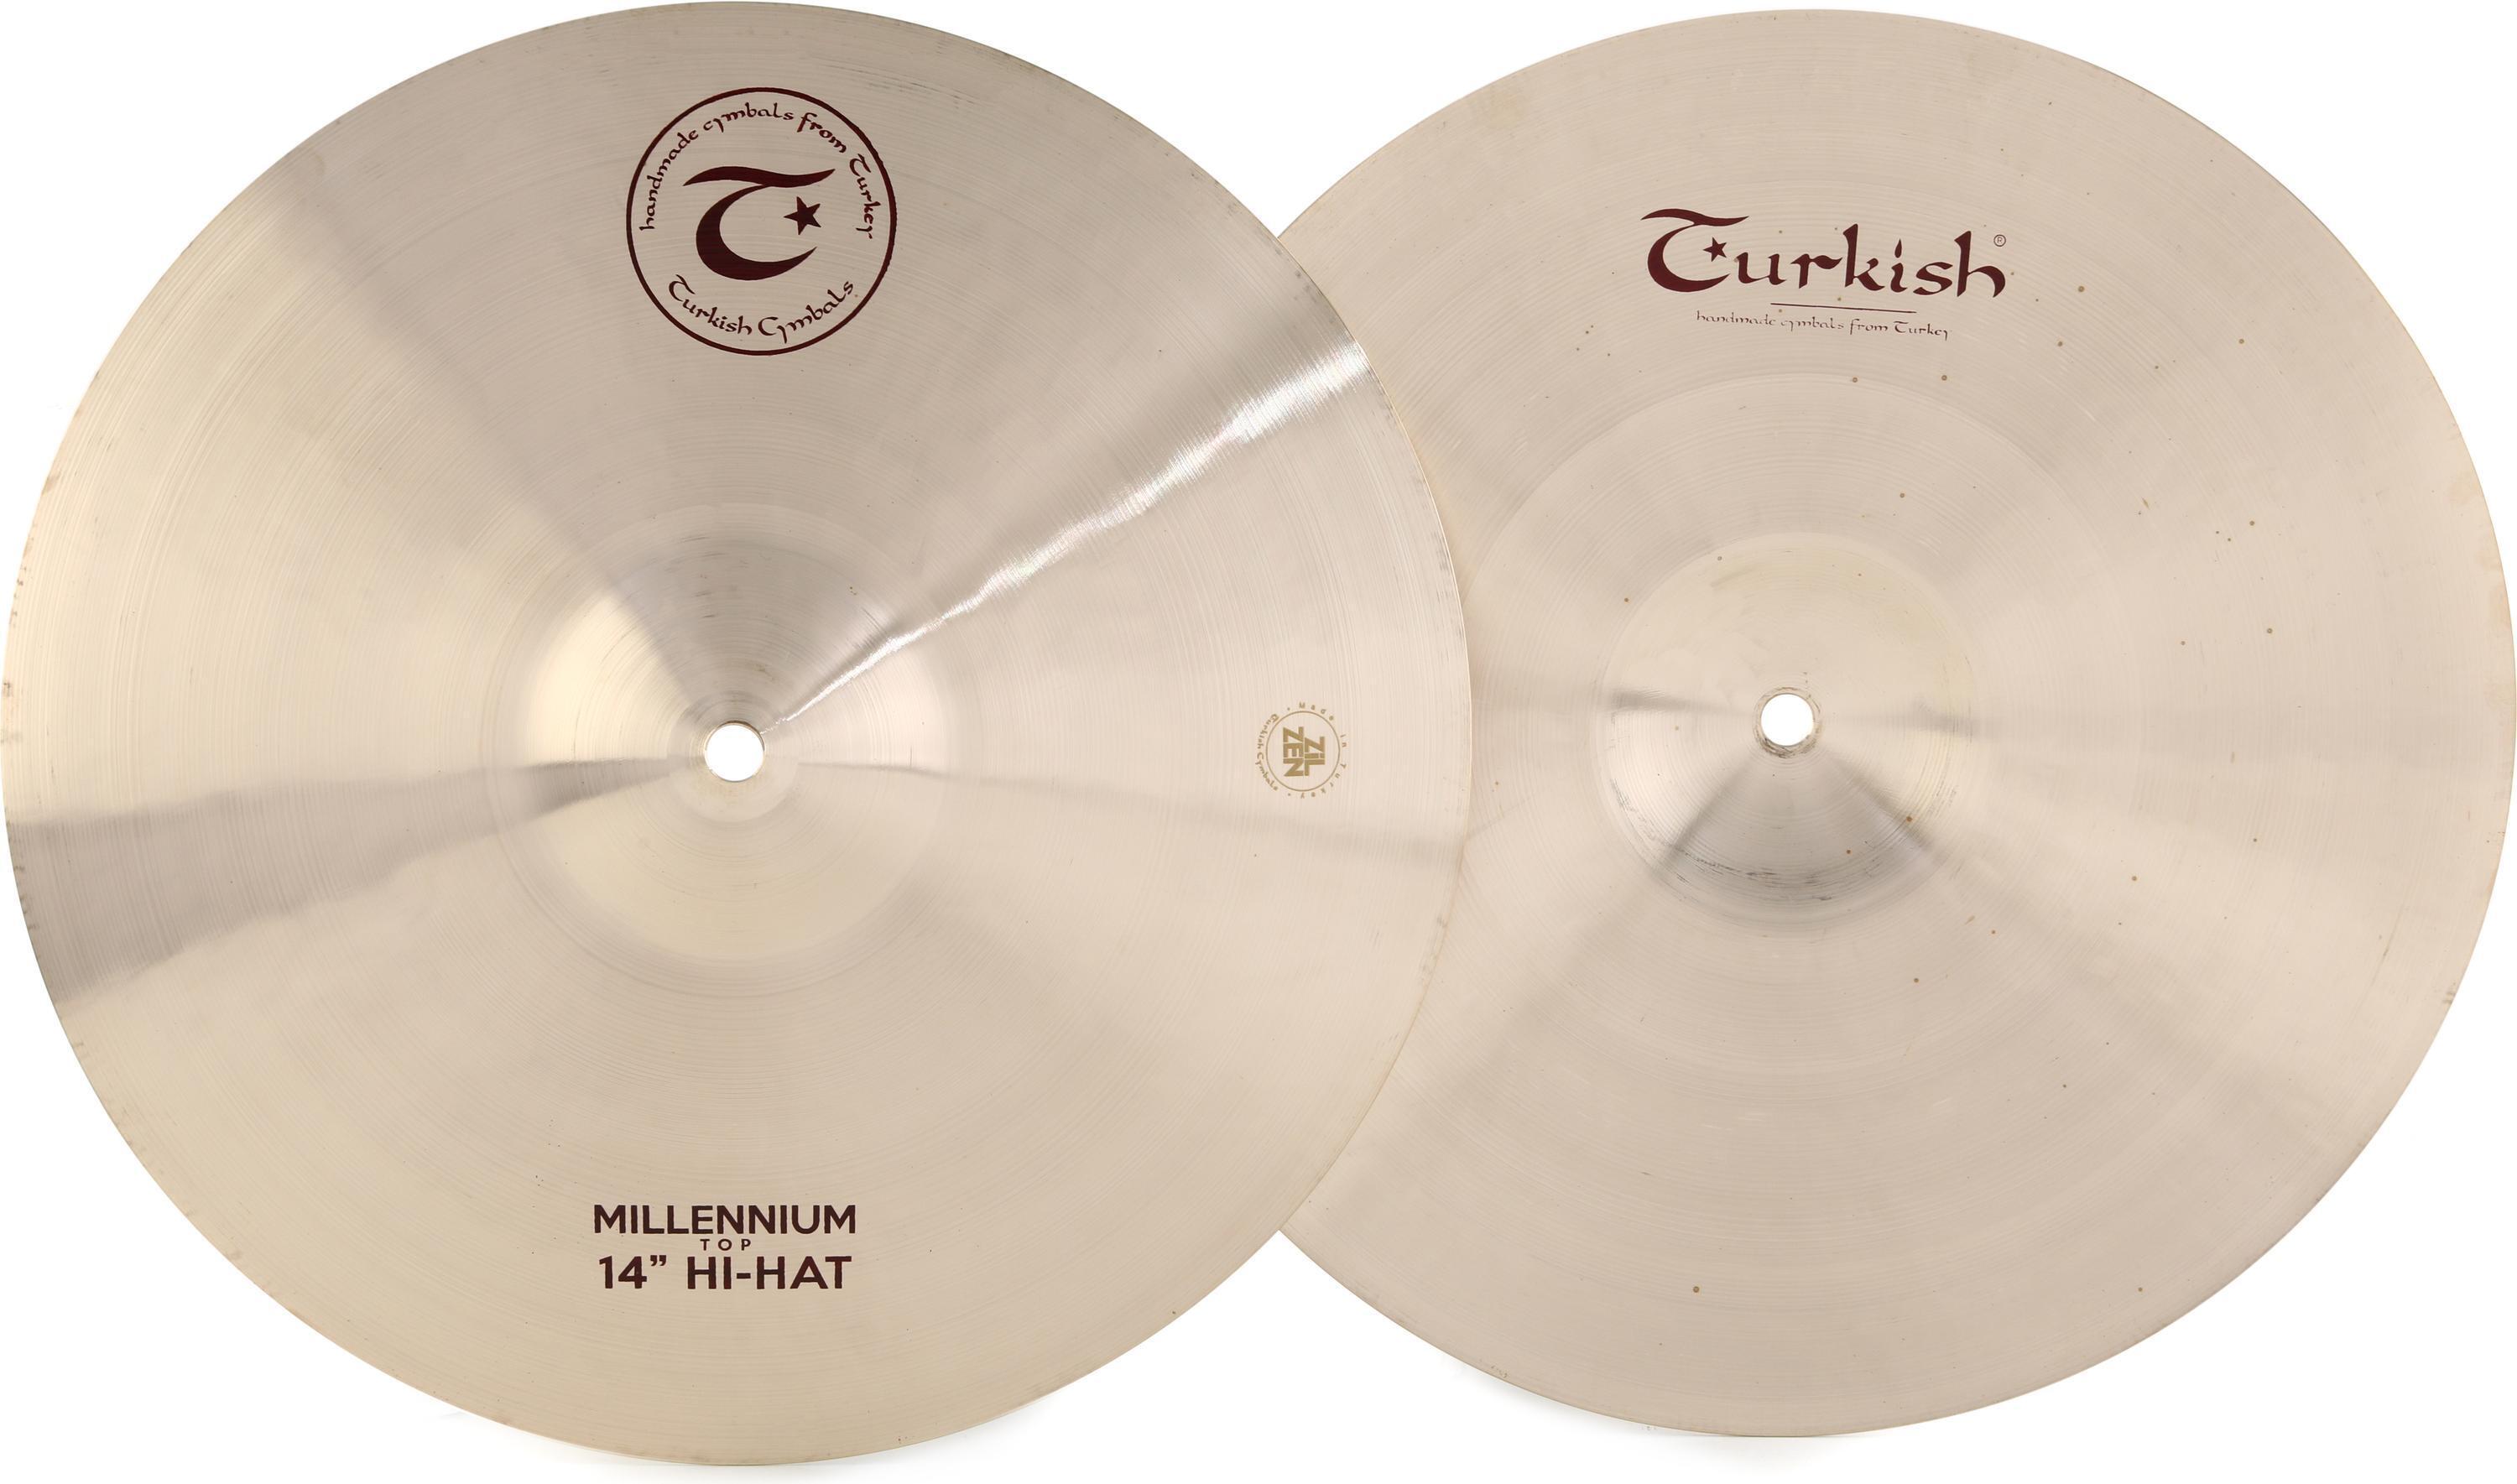 Turkish Cymbals Millennium Cymbal Pack - 14/16/18/21 inch | Sweetwater